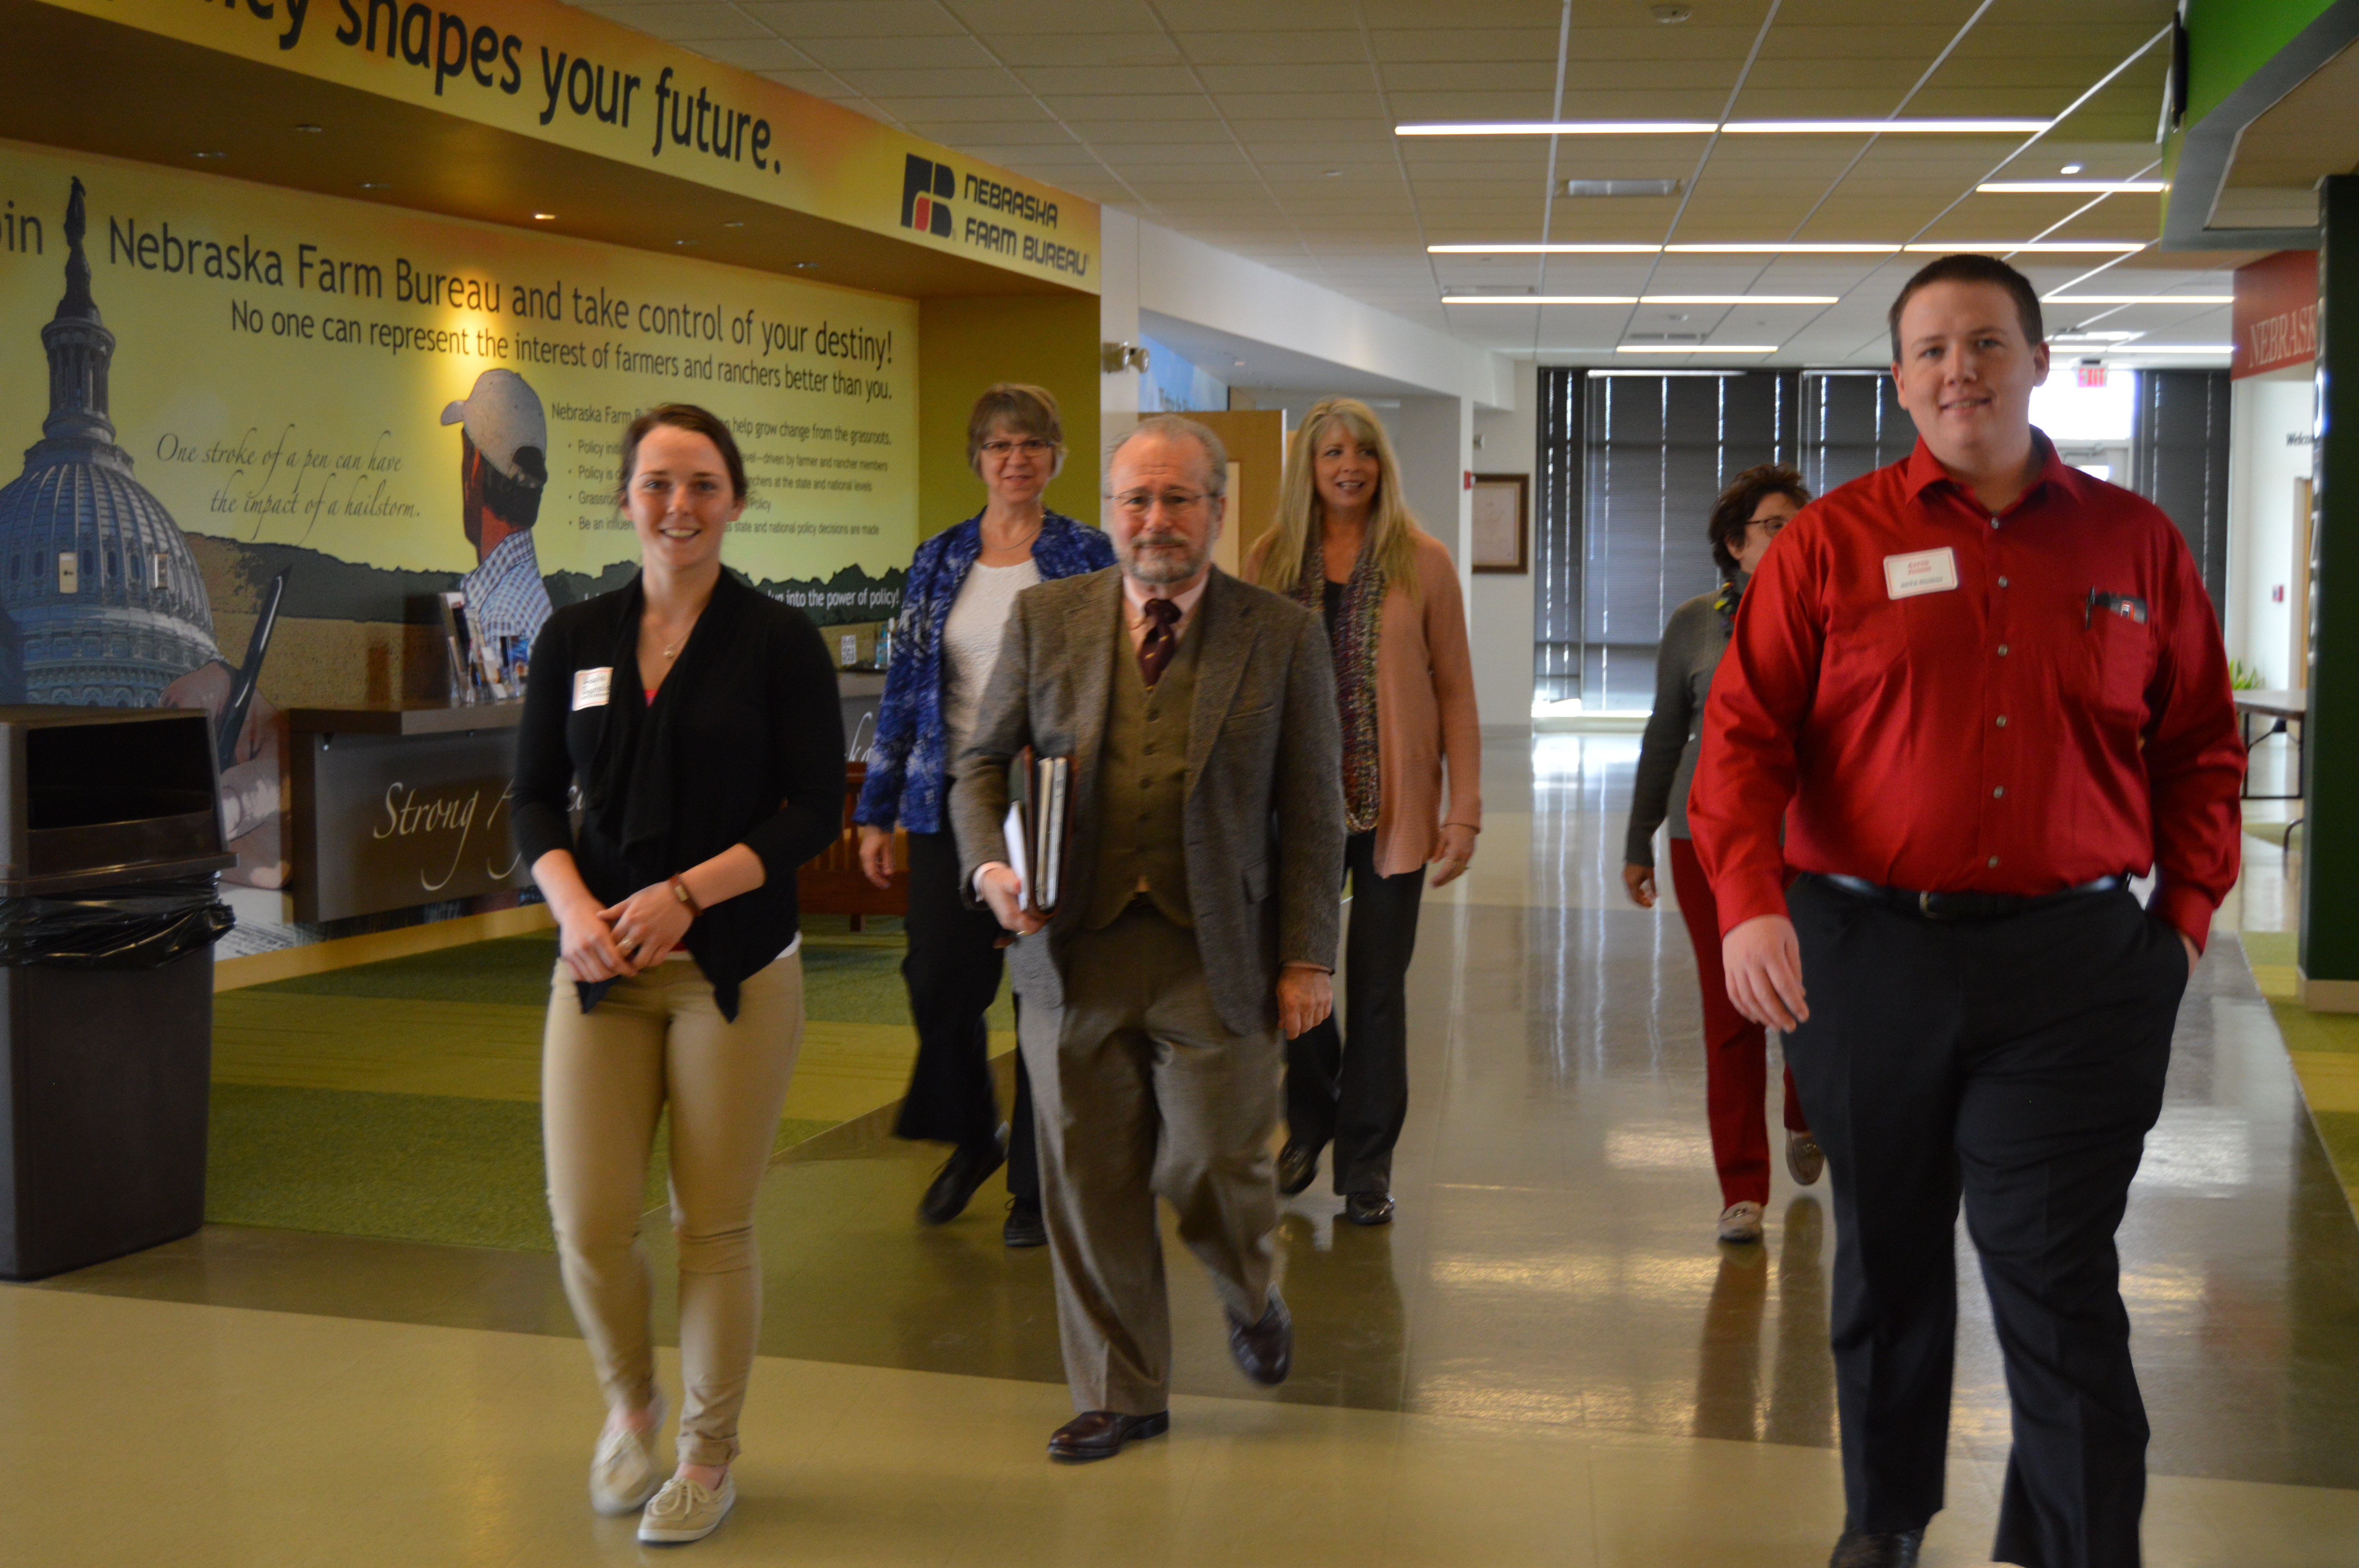 NCTA students Kayla Reynolds, left, and Aaron Jensen, right, lead HLC team reviewers at NCTA’s Nebraska Agriculture Industry Education Center. (Crawford/NCTA photo)